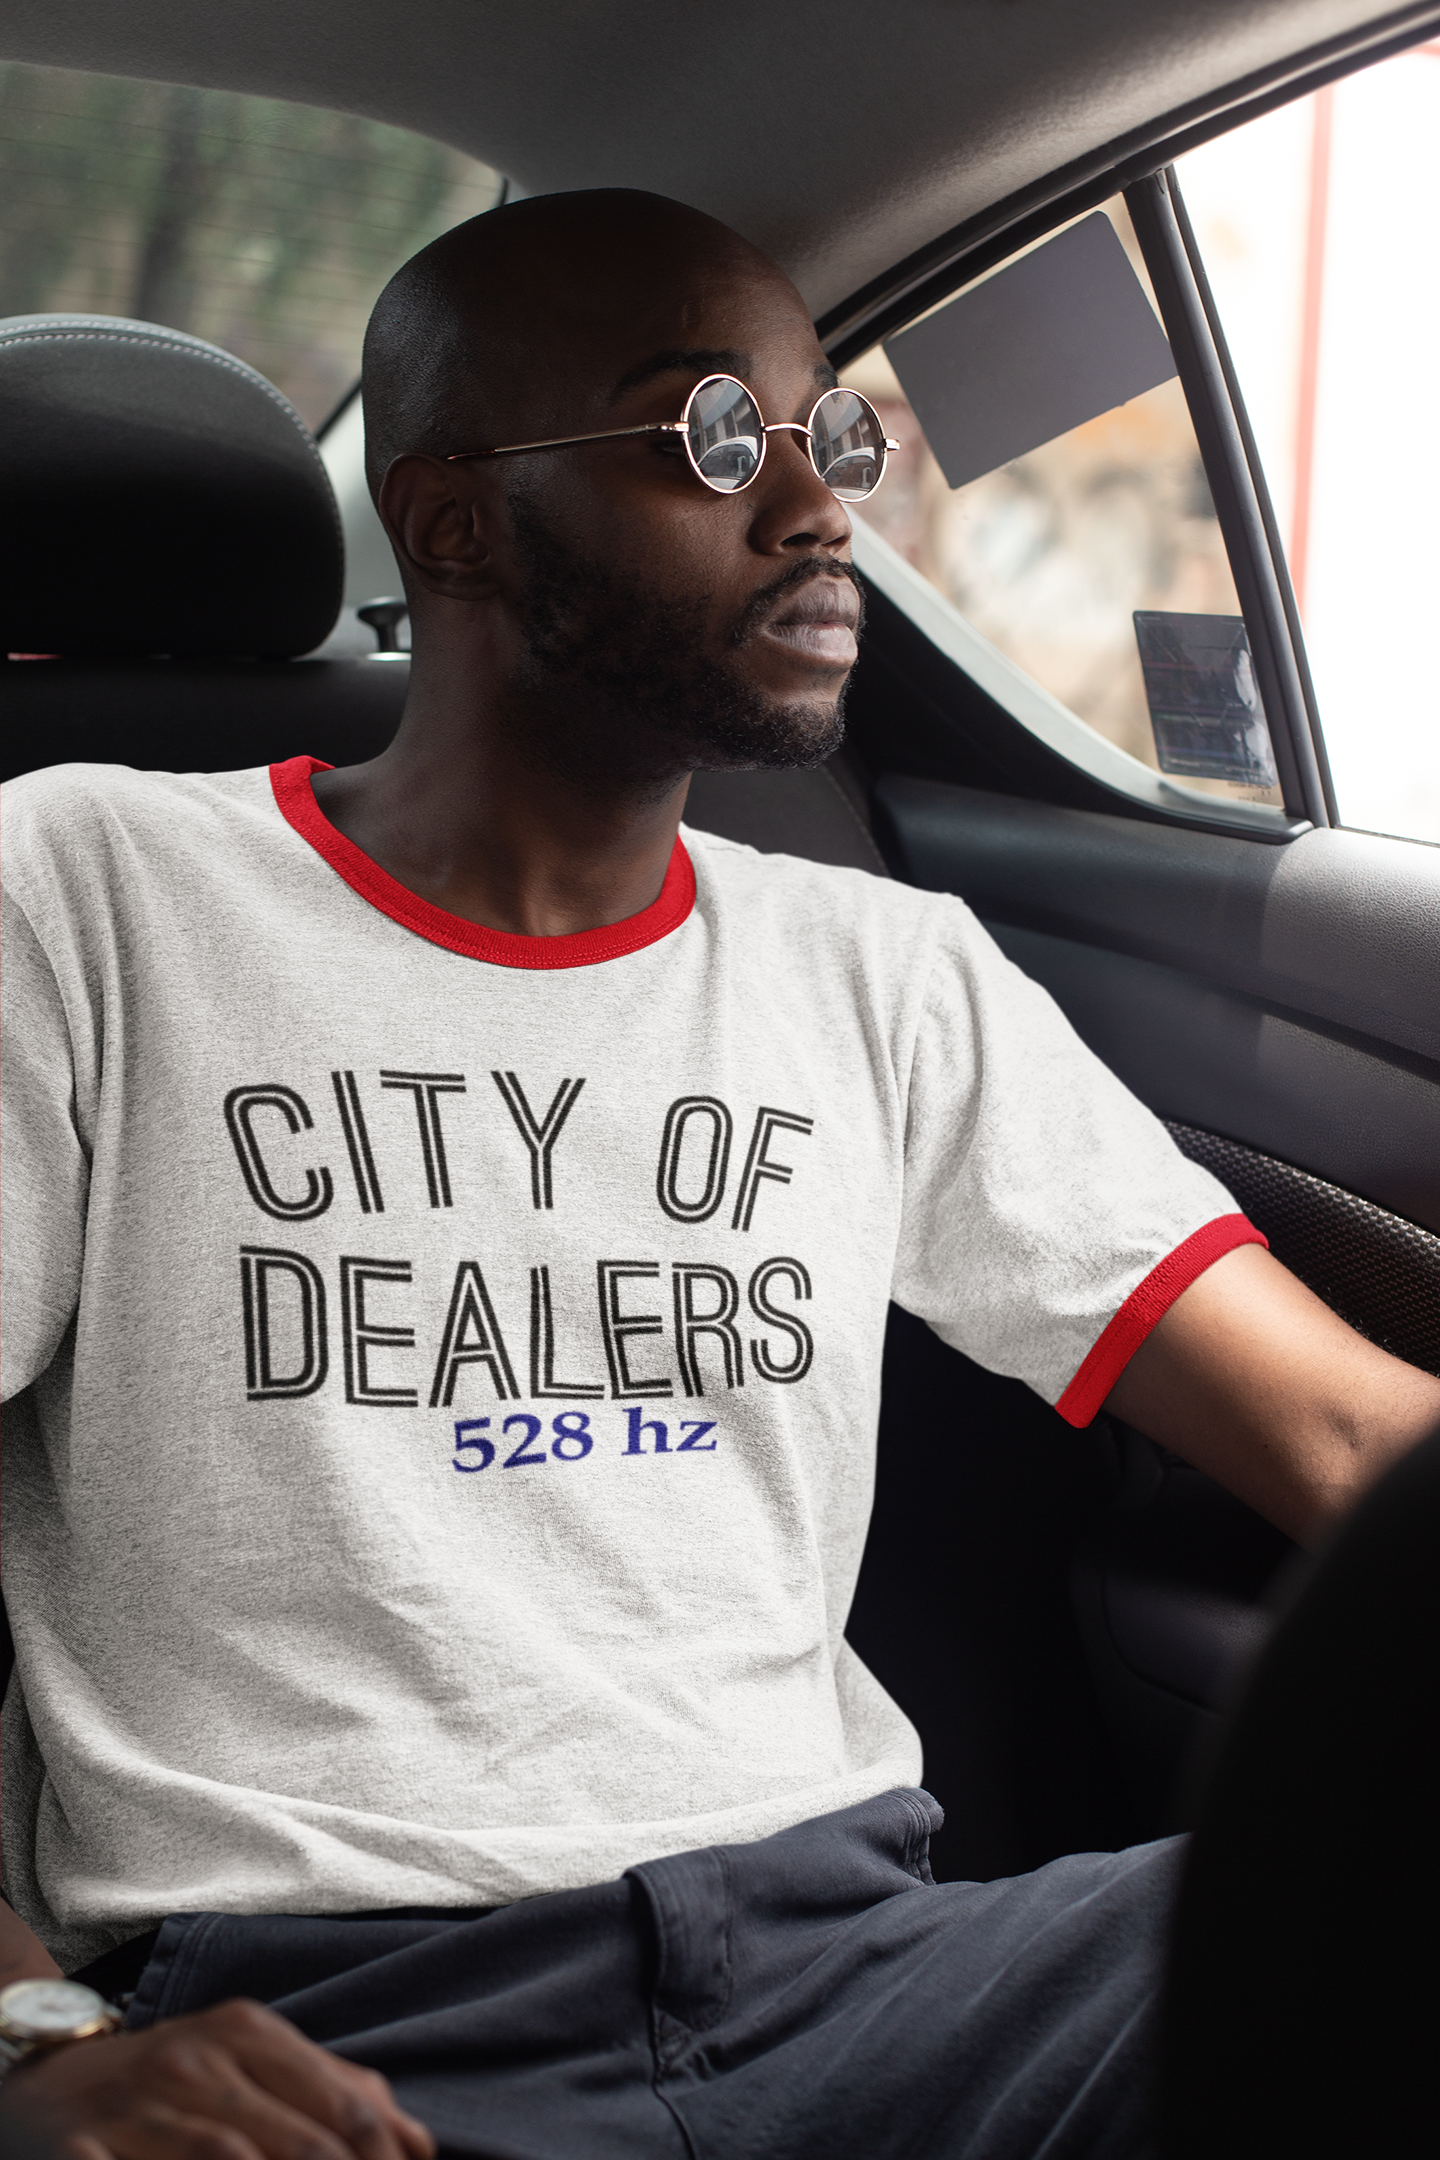 City of Dealers Super Fresh Super Clean Unisex Ringer T-Shirt For The Fly Guys & Fly Girls Around The World - The Official Dealers